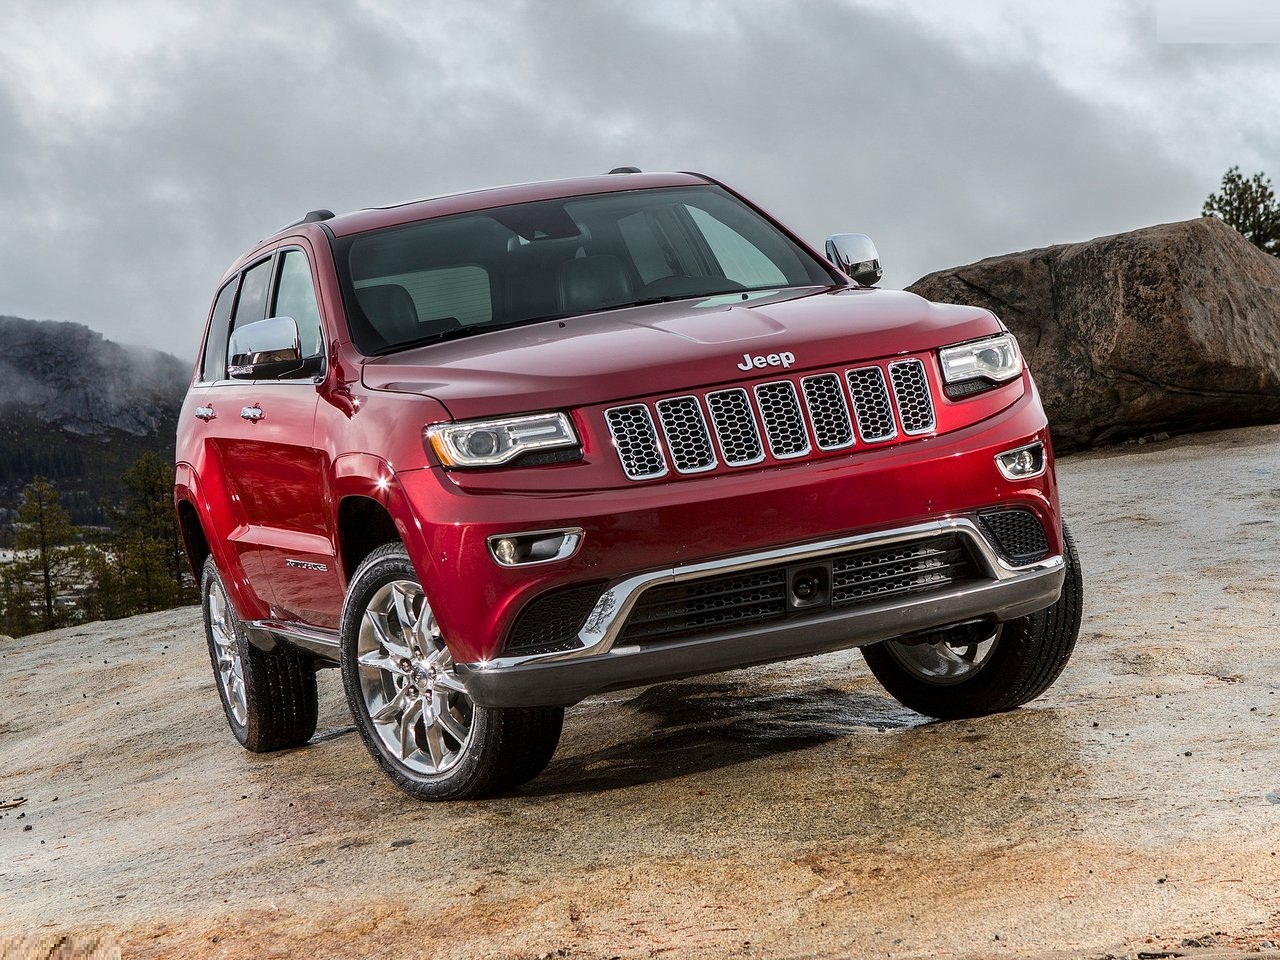 Jeep Grand Cherokee Wallpaper Pictures Pics Photos Image